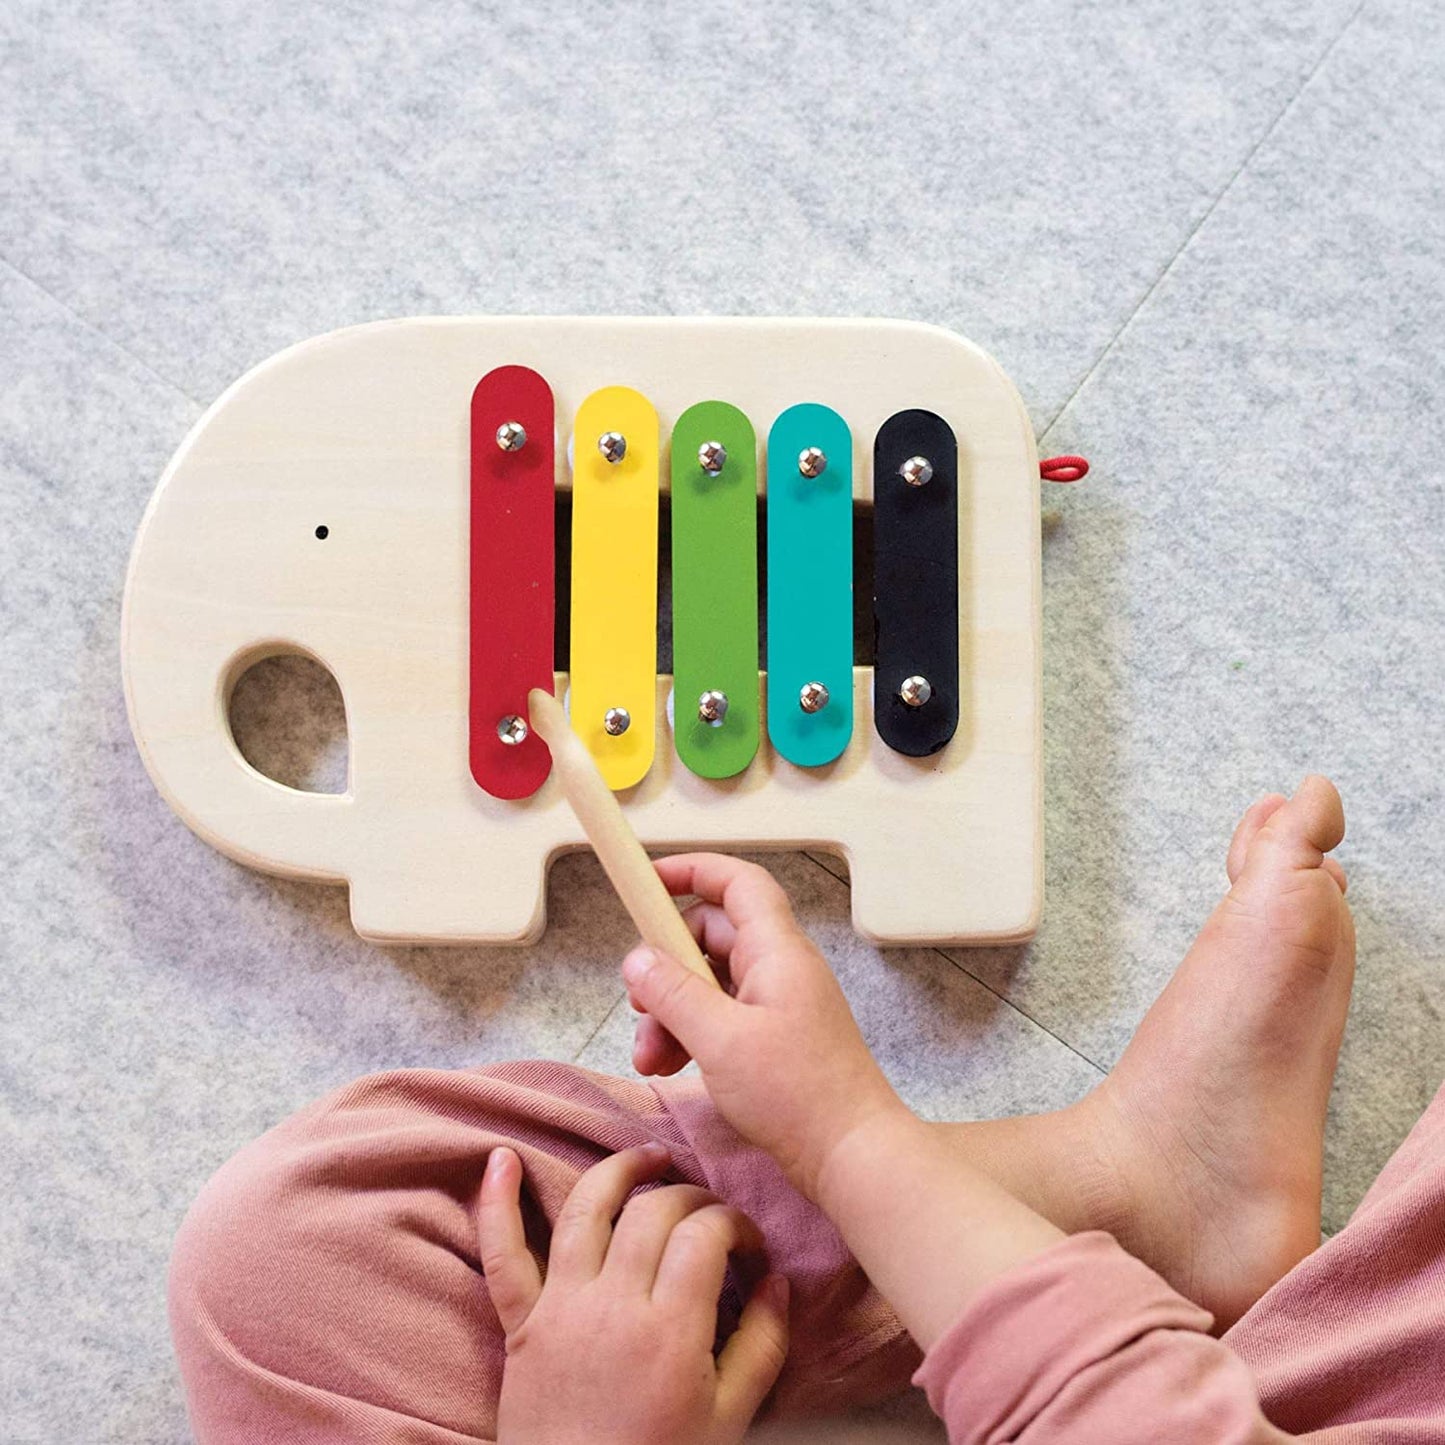 Petit Collage Jumbo Wooden Xylophone Musical Instrument